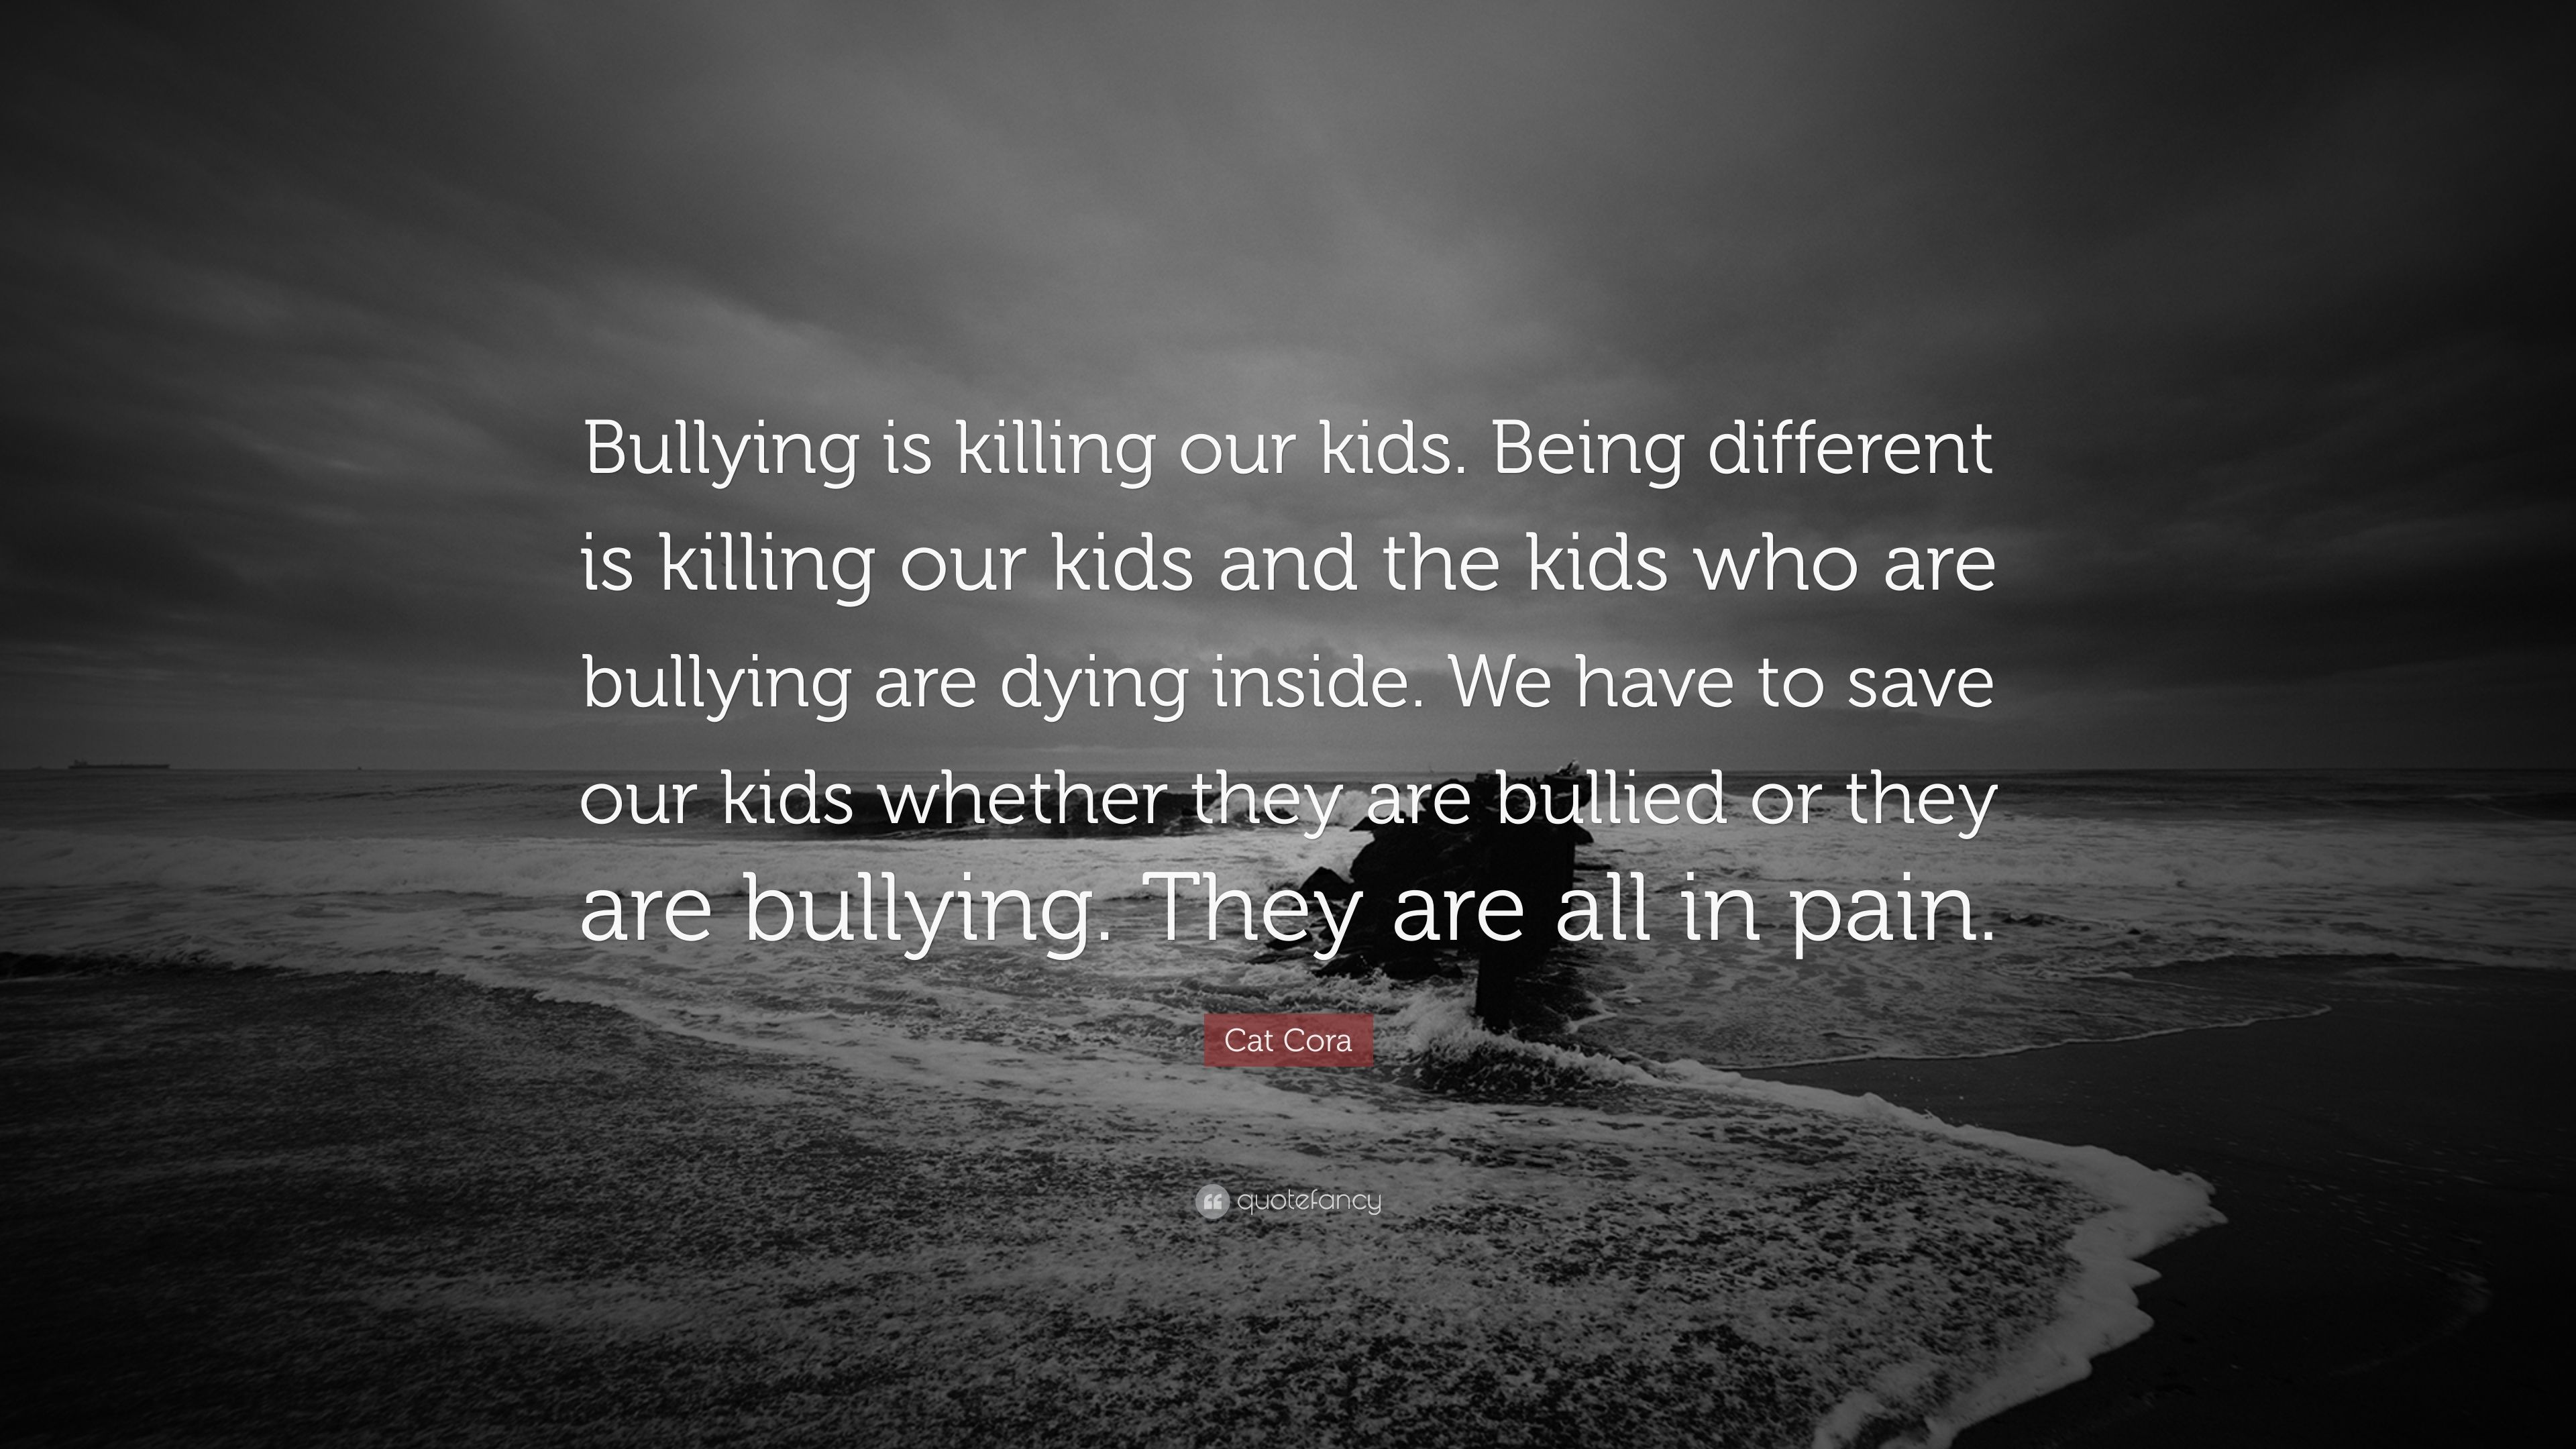 Cat Cora Quote: “Bullying is killing our kids. Being different is killing our kids and the kids who are bullying are dying inside. We hav.” (7 wallpaper)